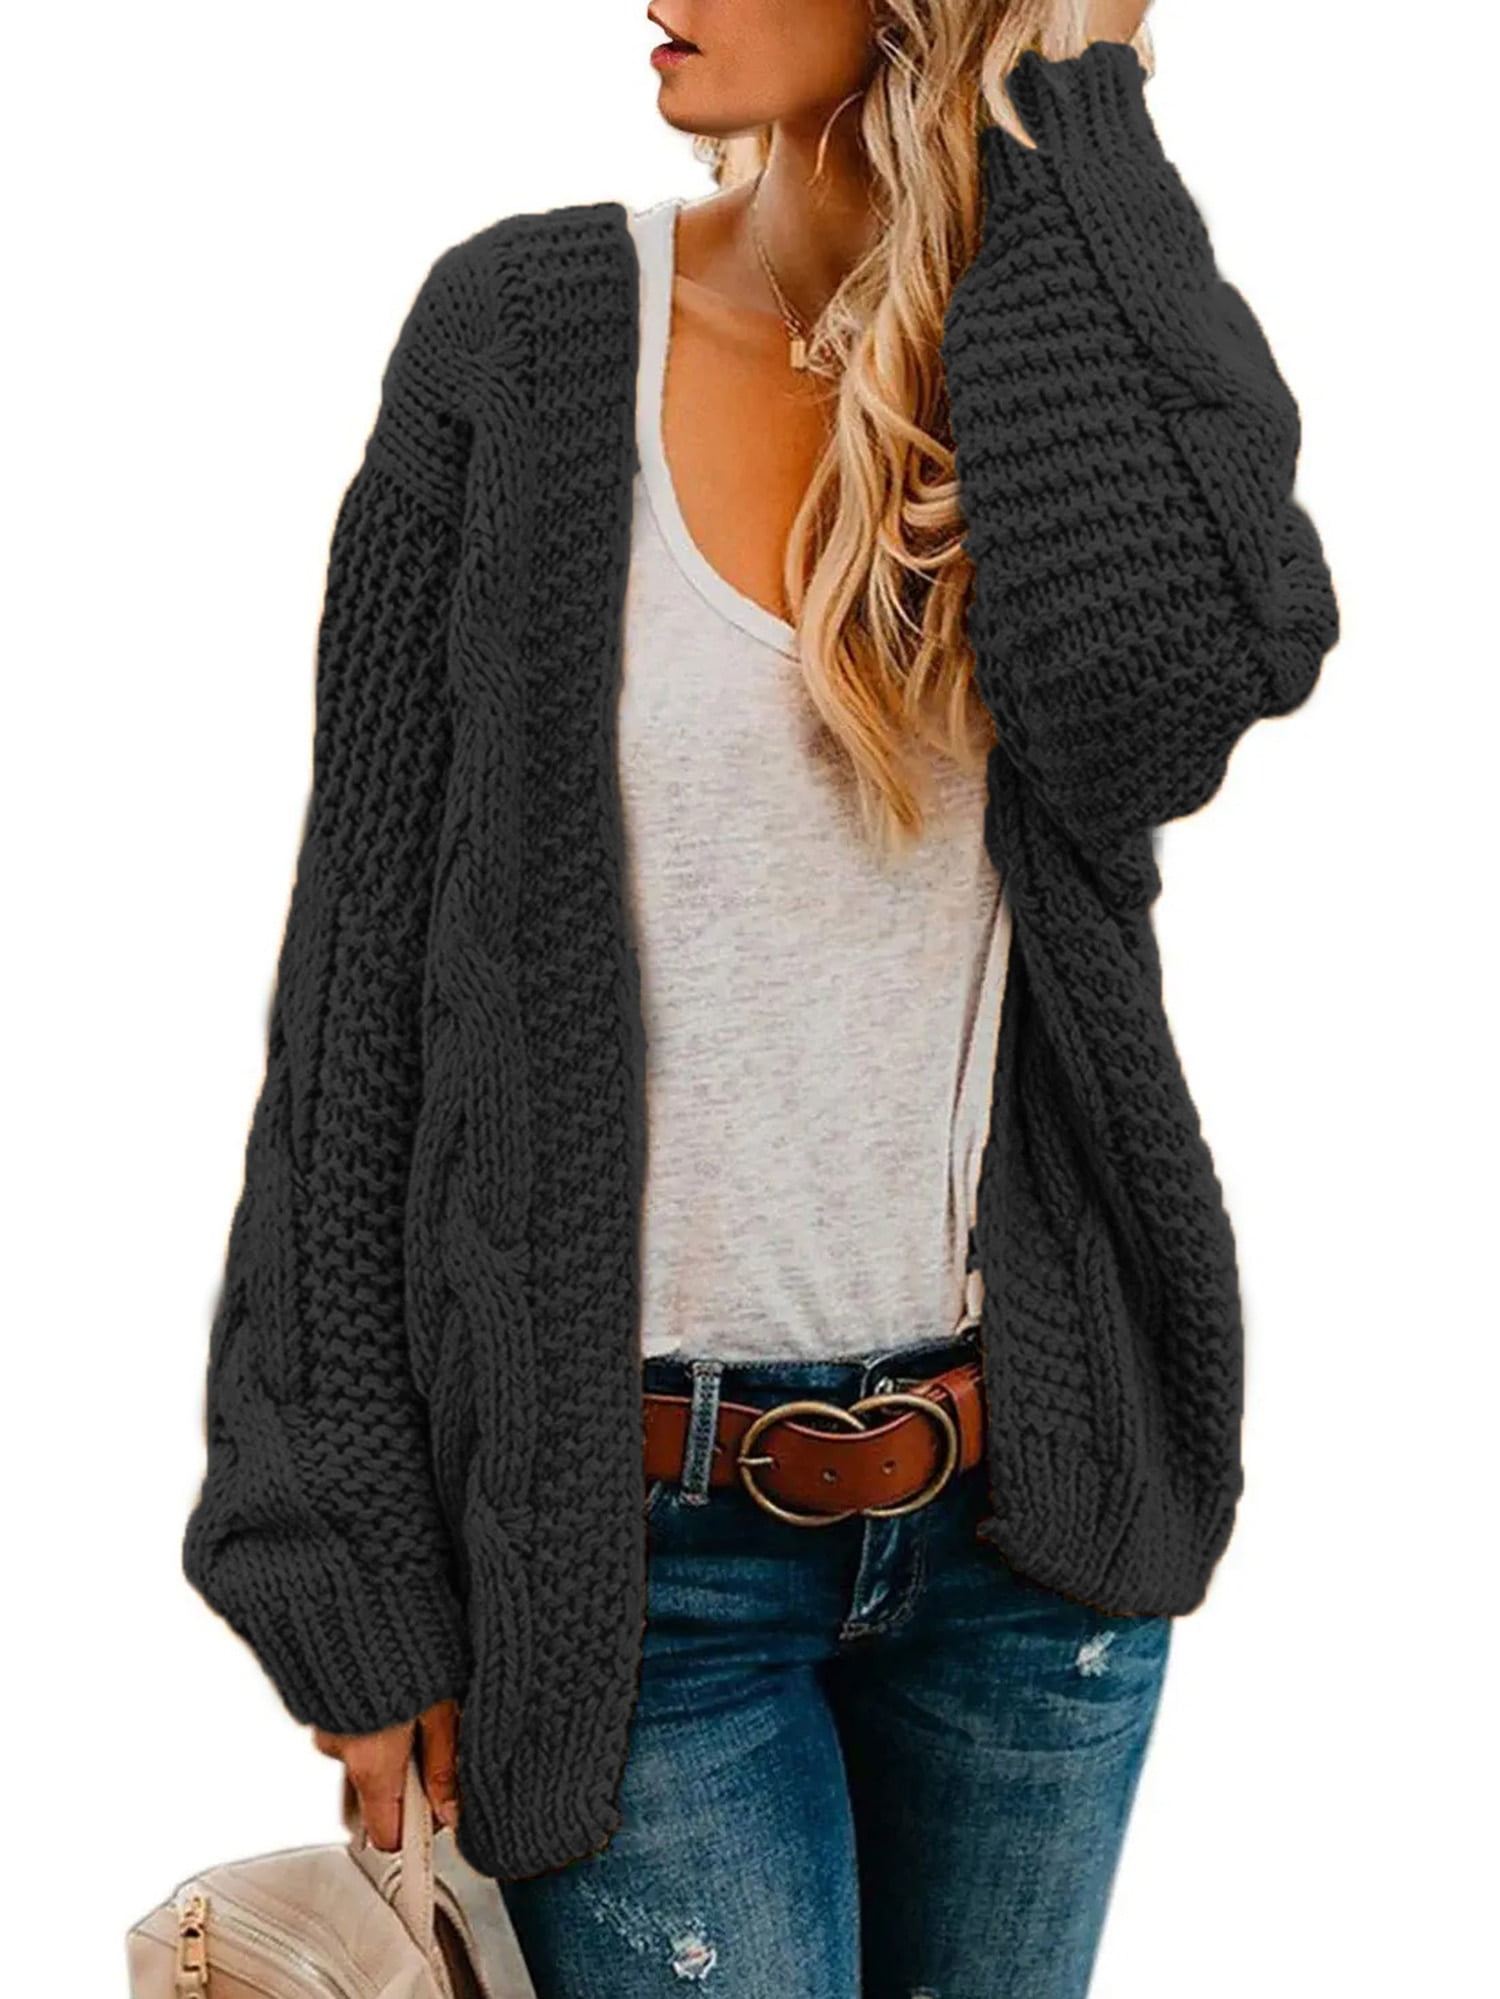 Fantaslook Cable Knit Cardigan for Women Loose Chunky Cardigan Open ...